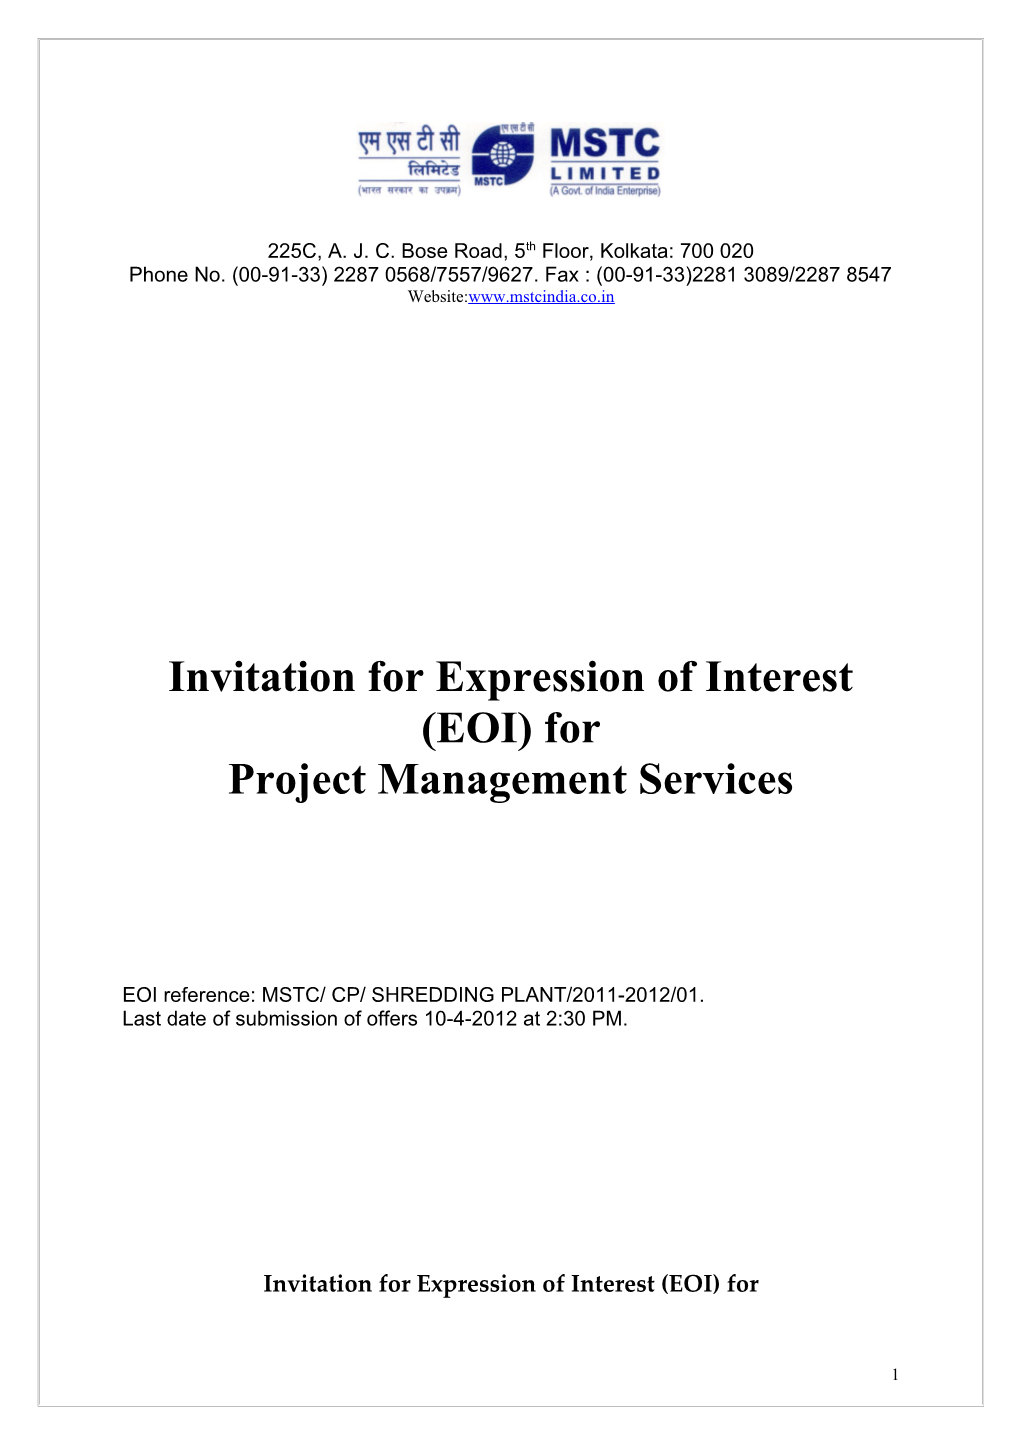 Invitation for Expression of Interest (EOI) For